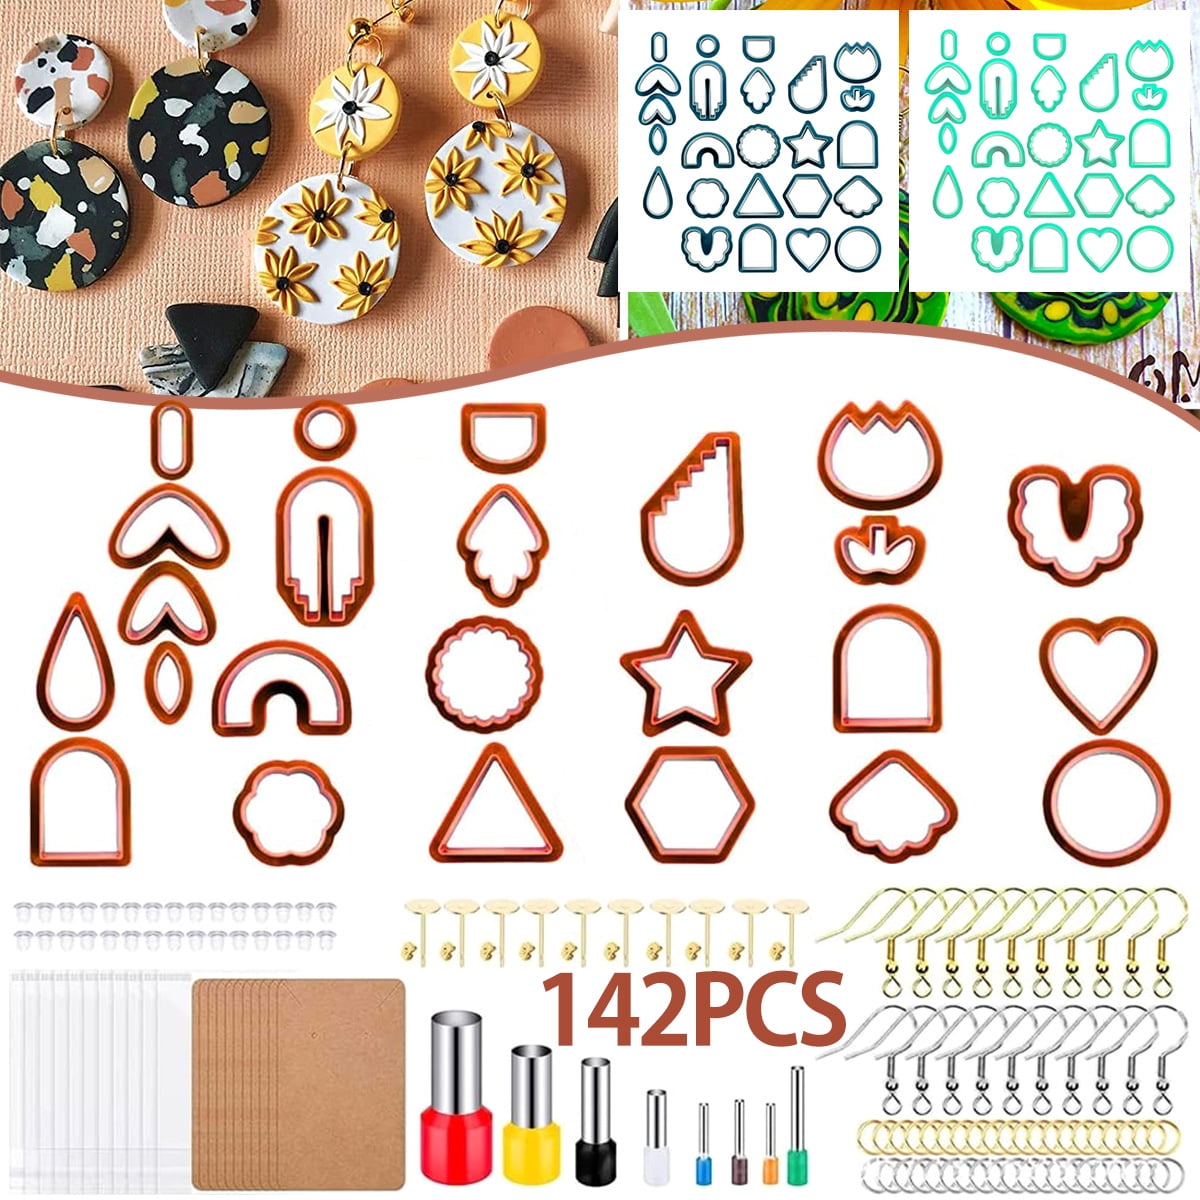 42pcs Polymer Clay Cutters Set, Set of 24 Shapes DIY Polymer Clay